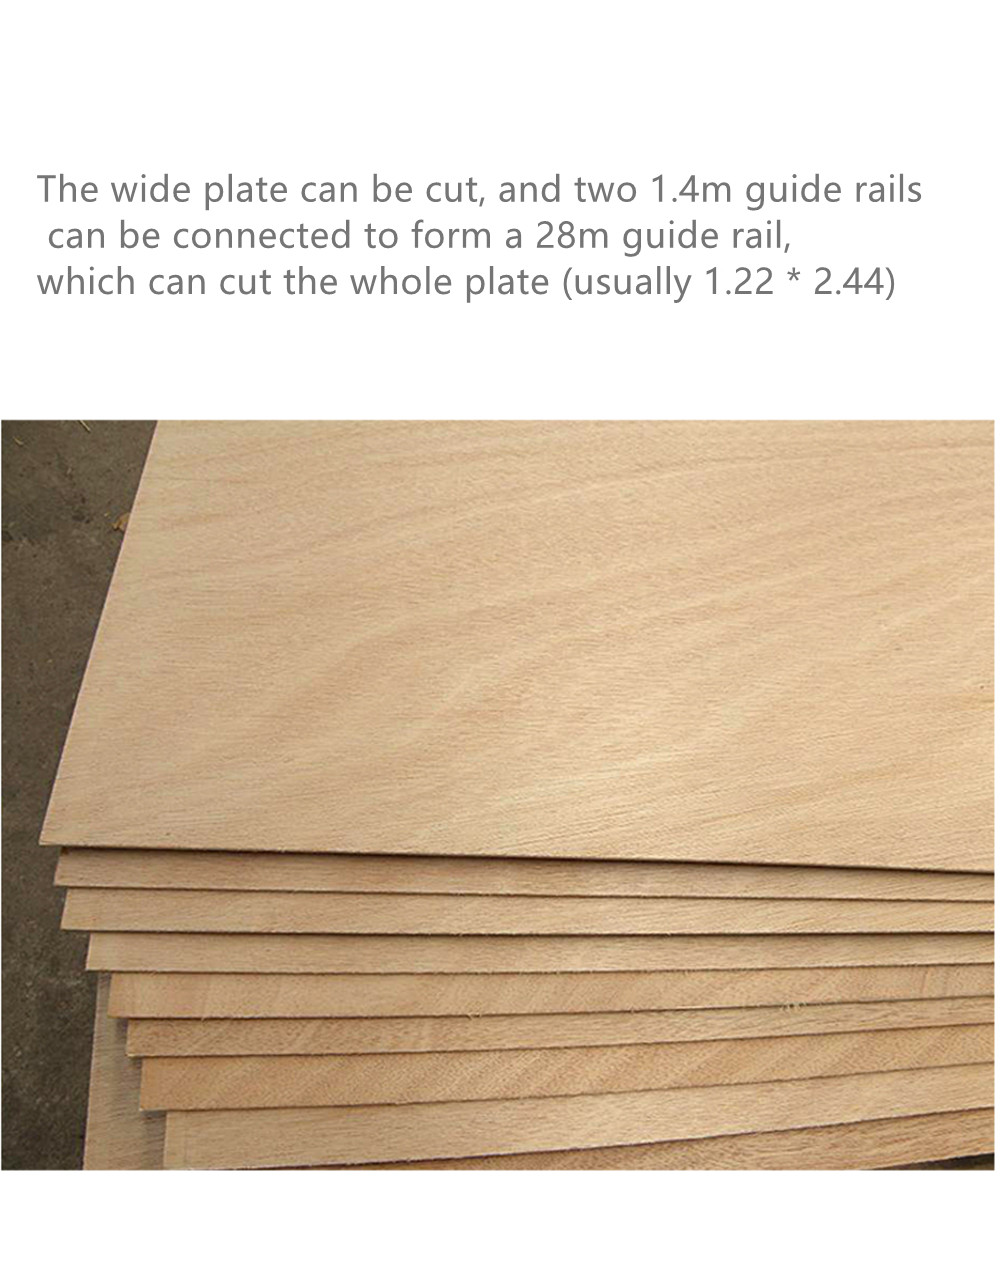 Marble-Machine-Guide-Rail-Accessories-Set-Guide-Ruler-Universal-Linear-Auxiliary-Ruler-DIY-Woodworki-1923724-4